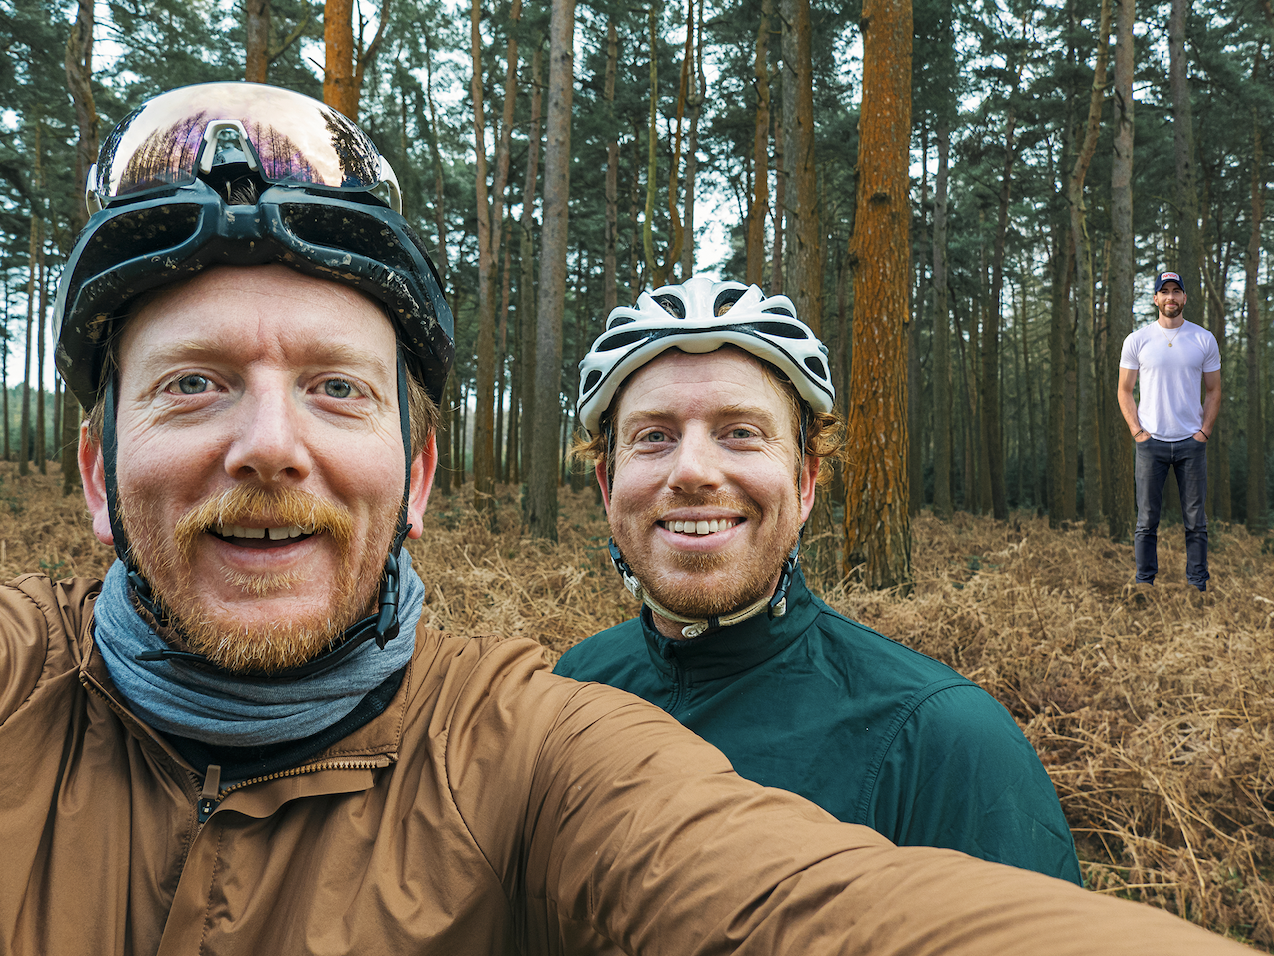 chris in the foreground of two cyclists taking a selfie in the woods